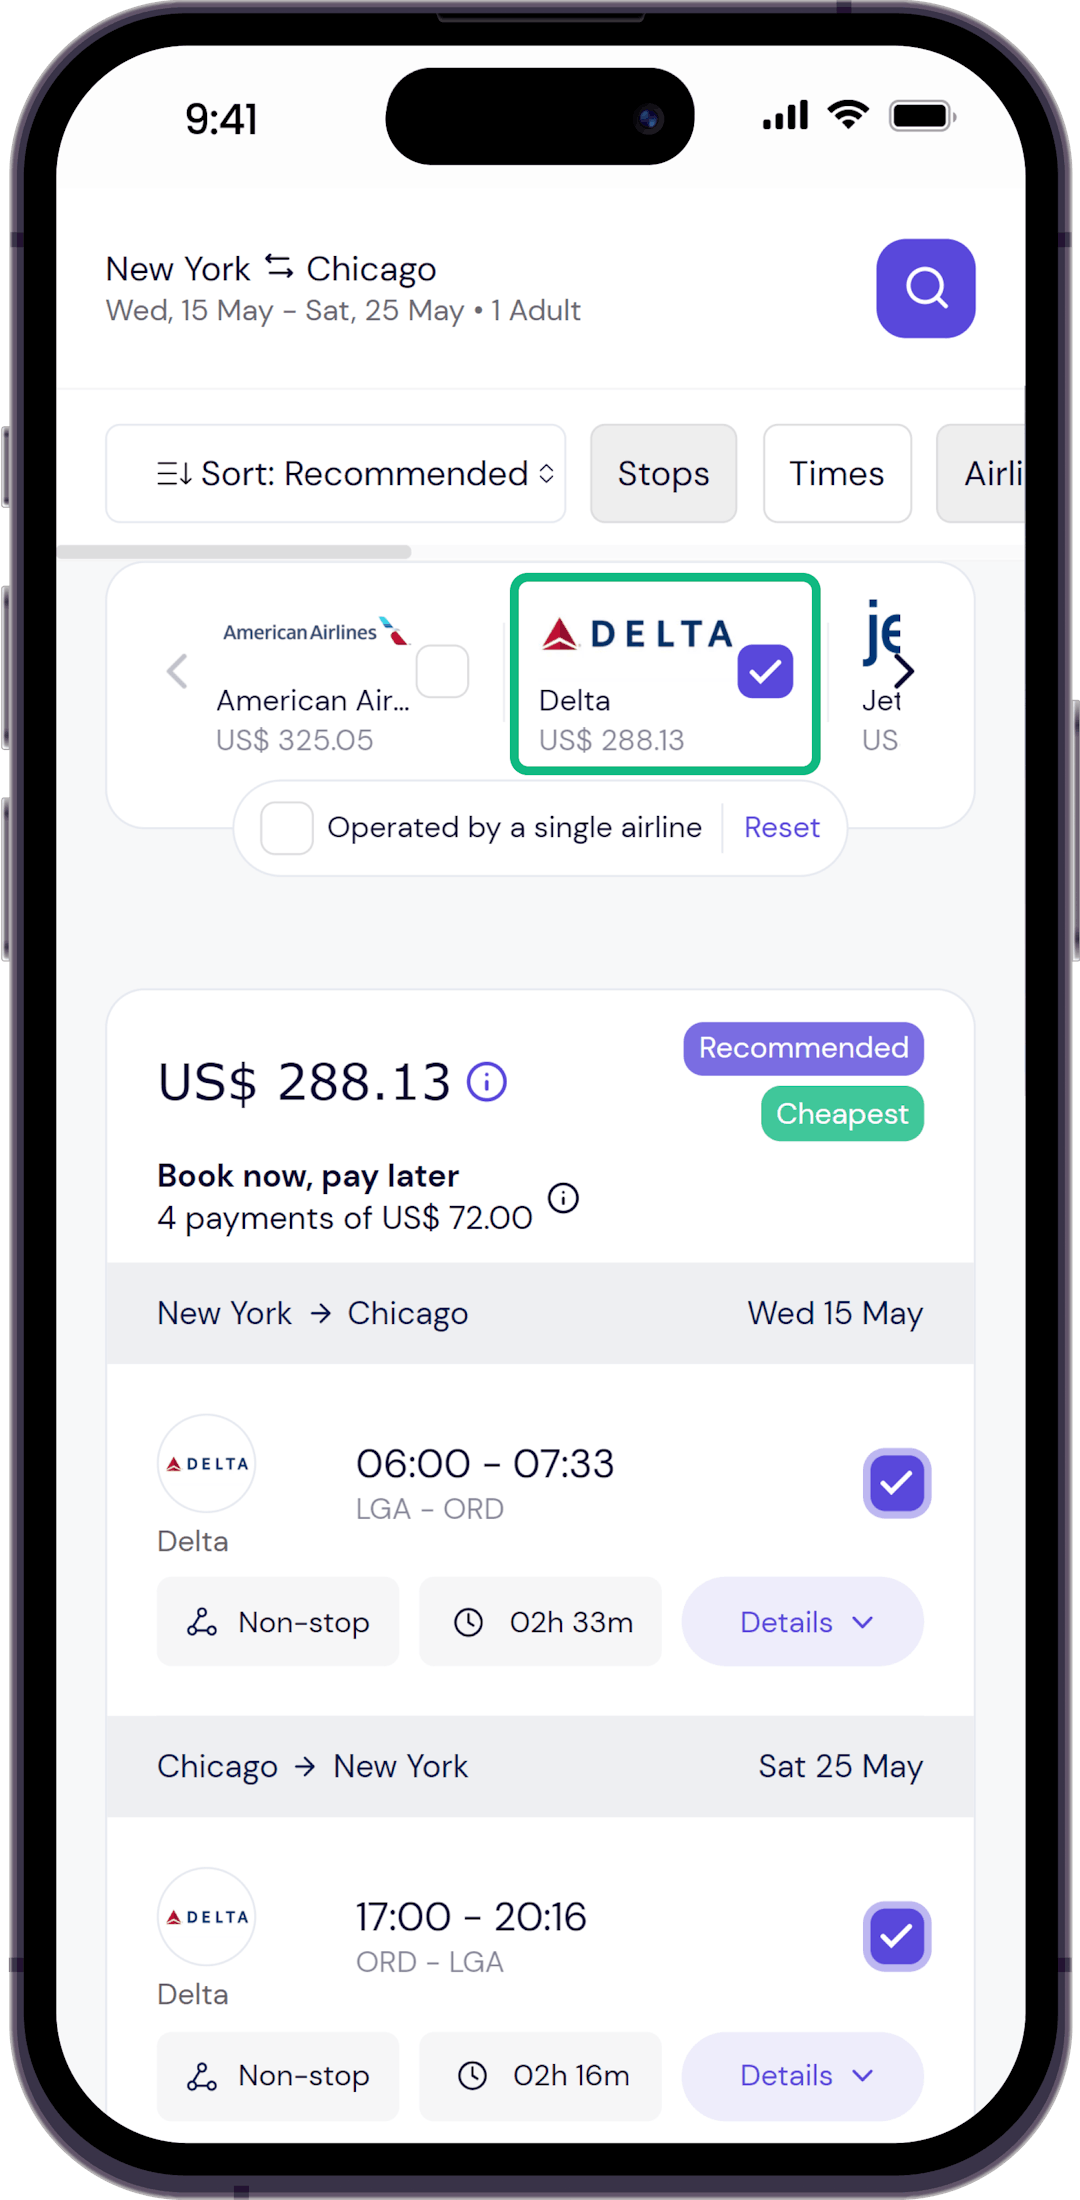 Step 2 - Select Delta as preferred airline